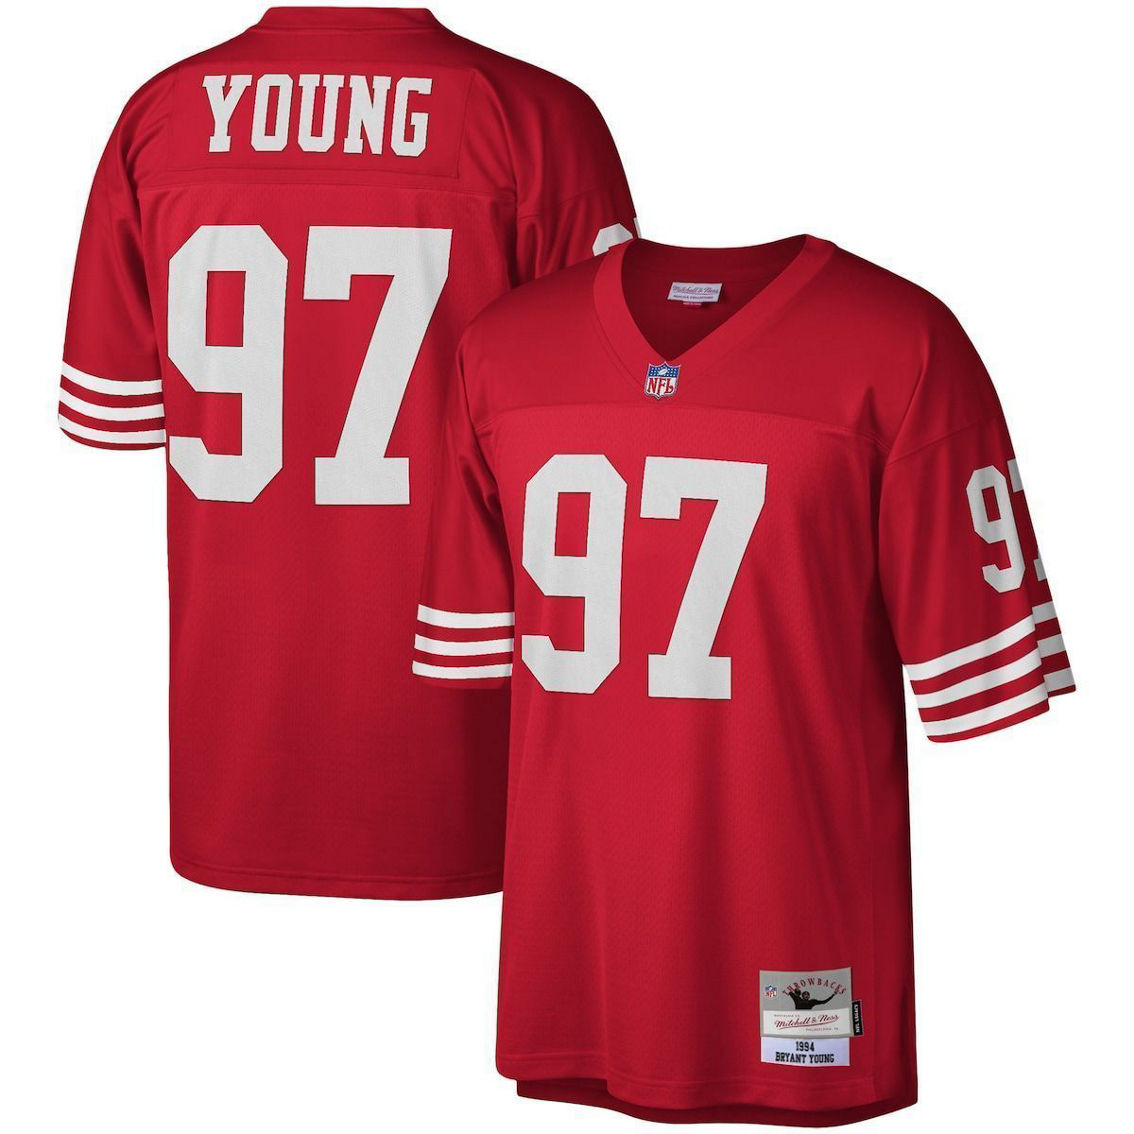 Men's Mitchell & Ness Bryant Young Scarlet San Francisco 49ers 1994 Legacy Replica Jersey - Image 2 of 4